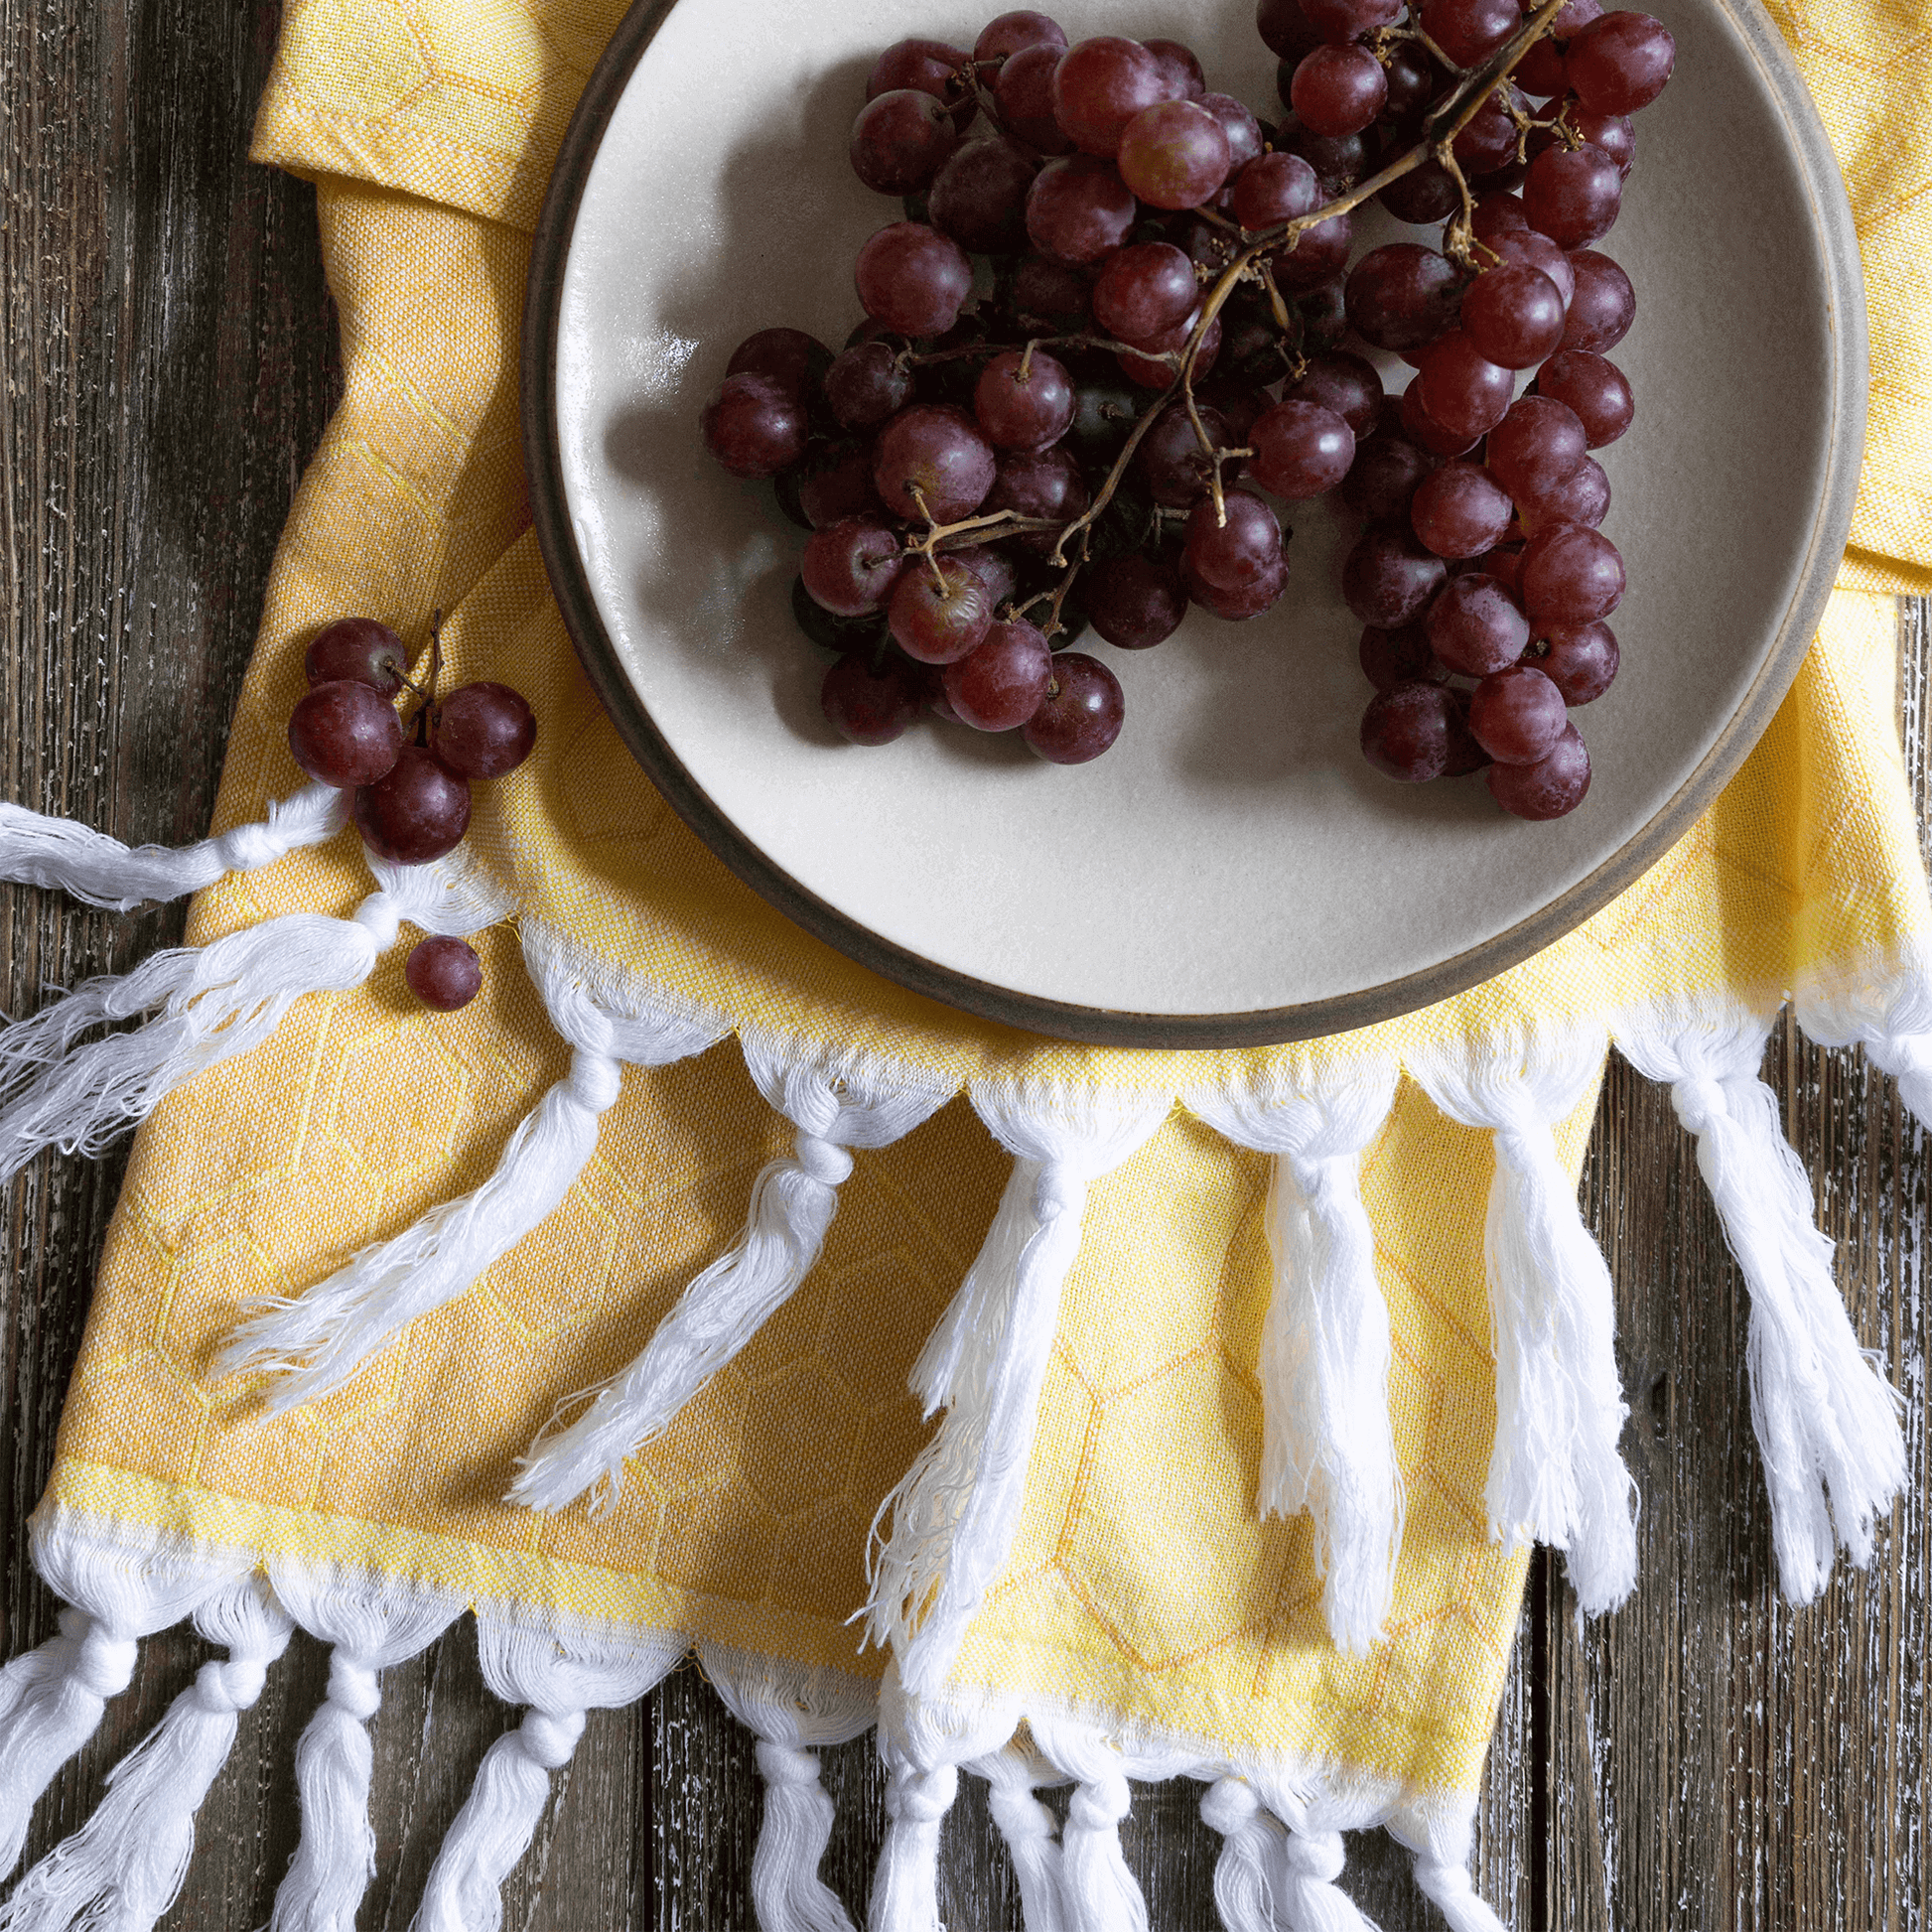 Yellow and orange Turkish towel with grapes